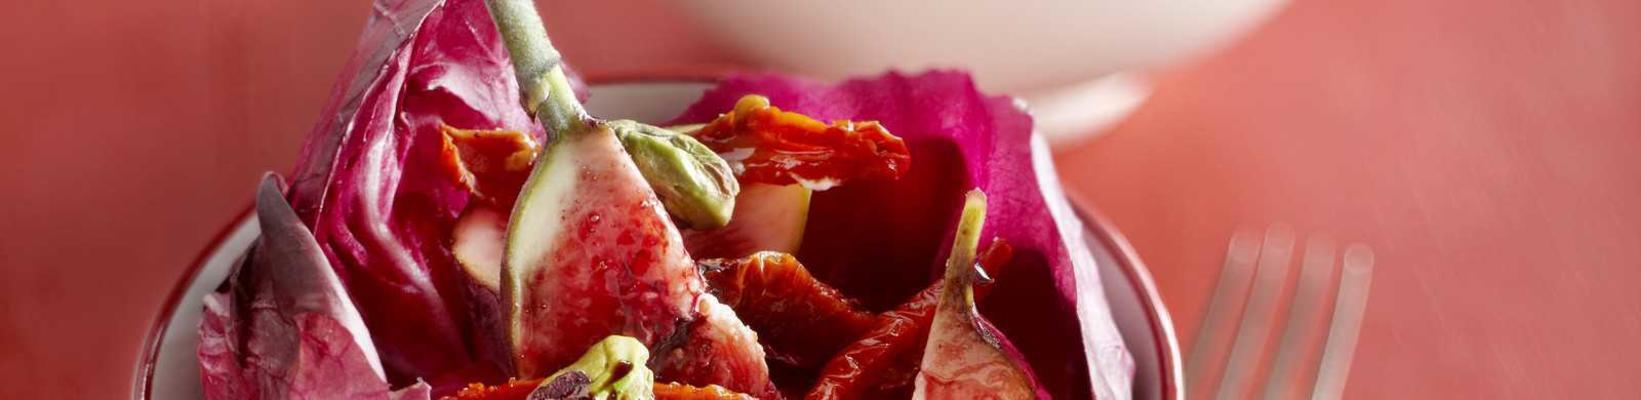 radicchio with ricotta, figs and pistachios